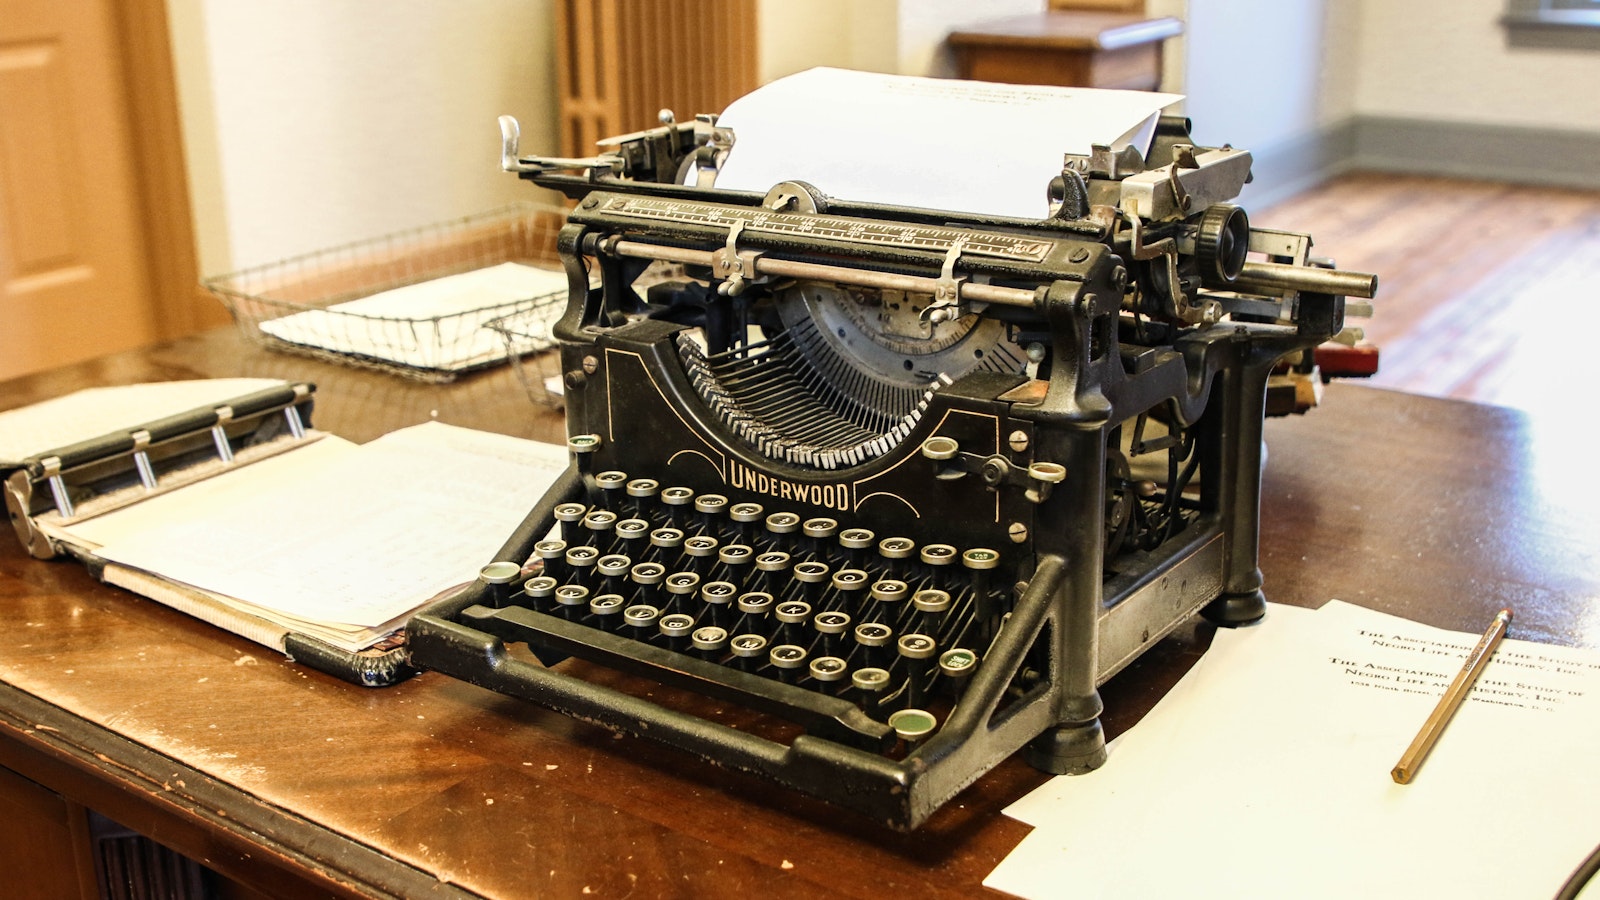 Vintage typewriter and sheets of paper sit on a large wooden desk.